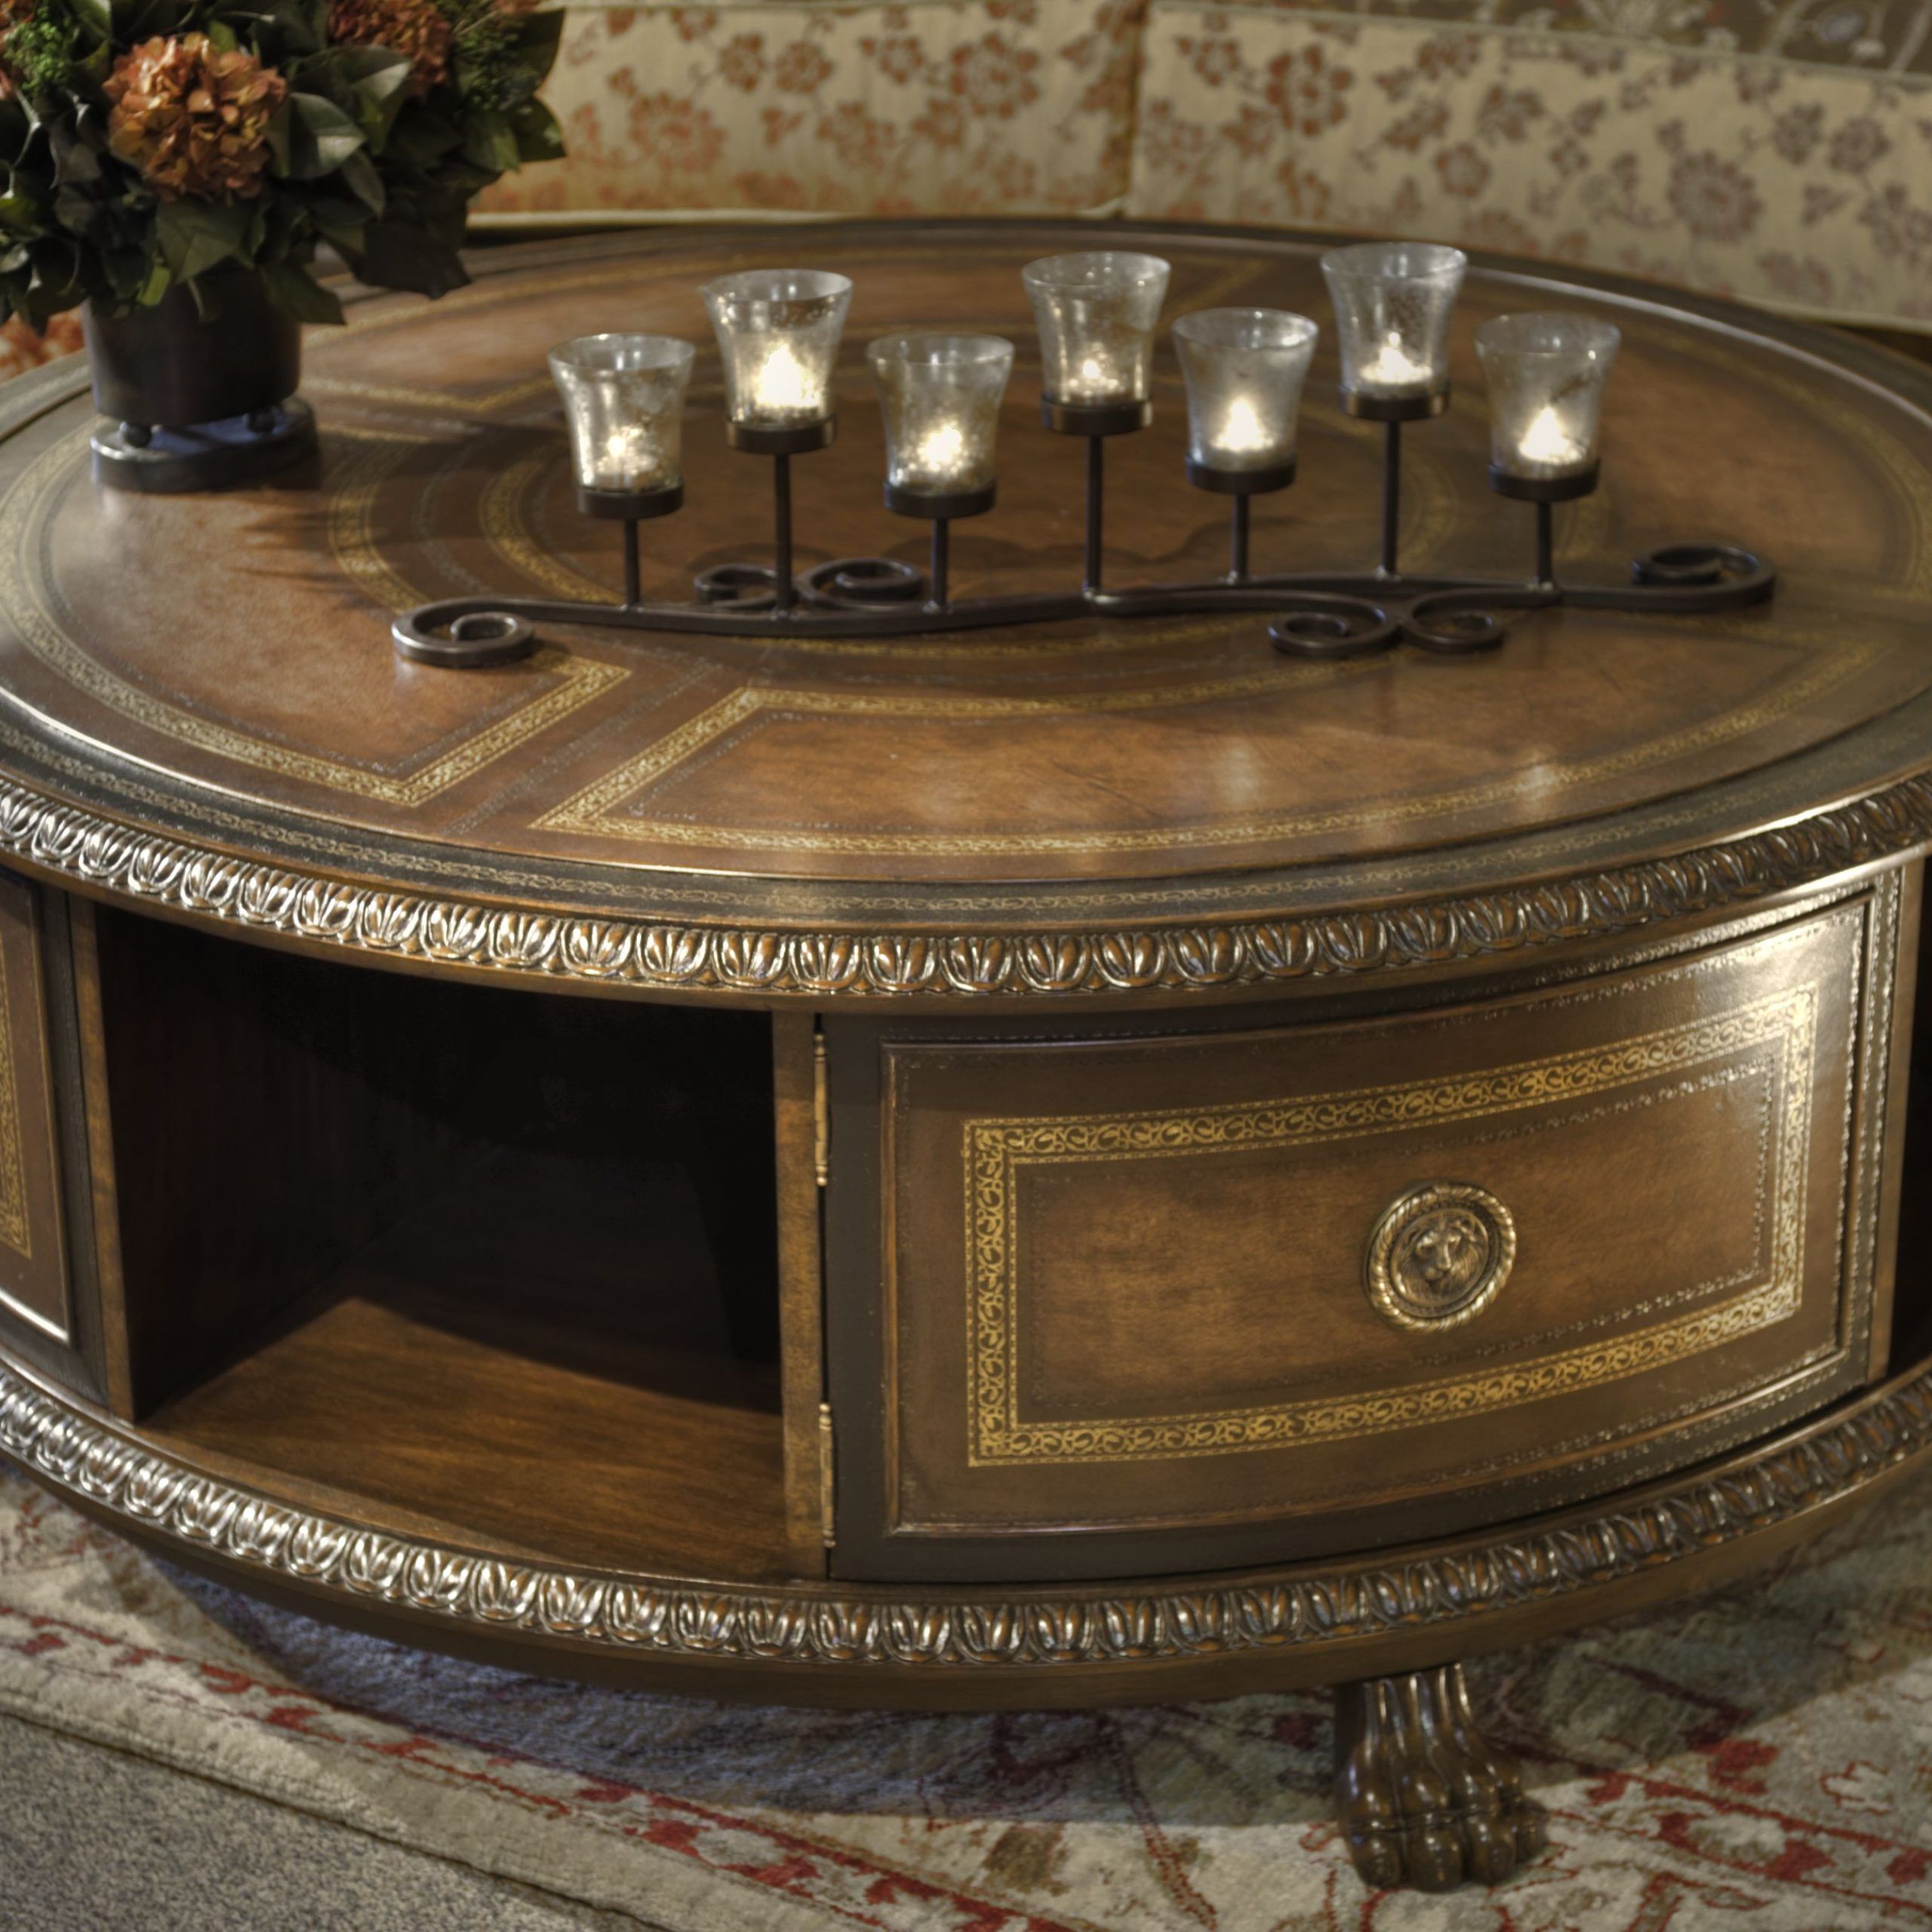 Unique Round Coffee Tables For Every Style And Home – Coffee Table Decor Inside American Heritage Round Coffee Tables (Gallery 18 of 20)